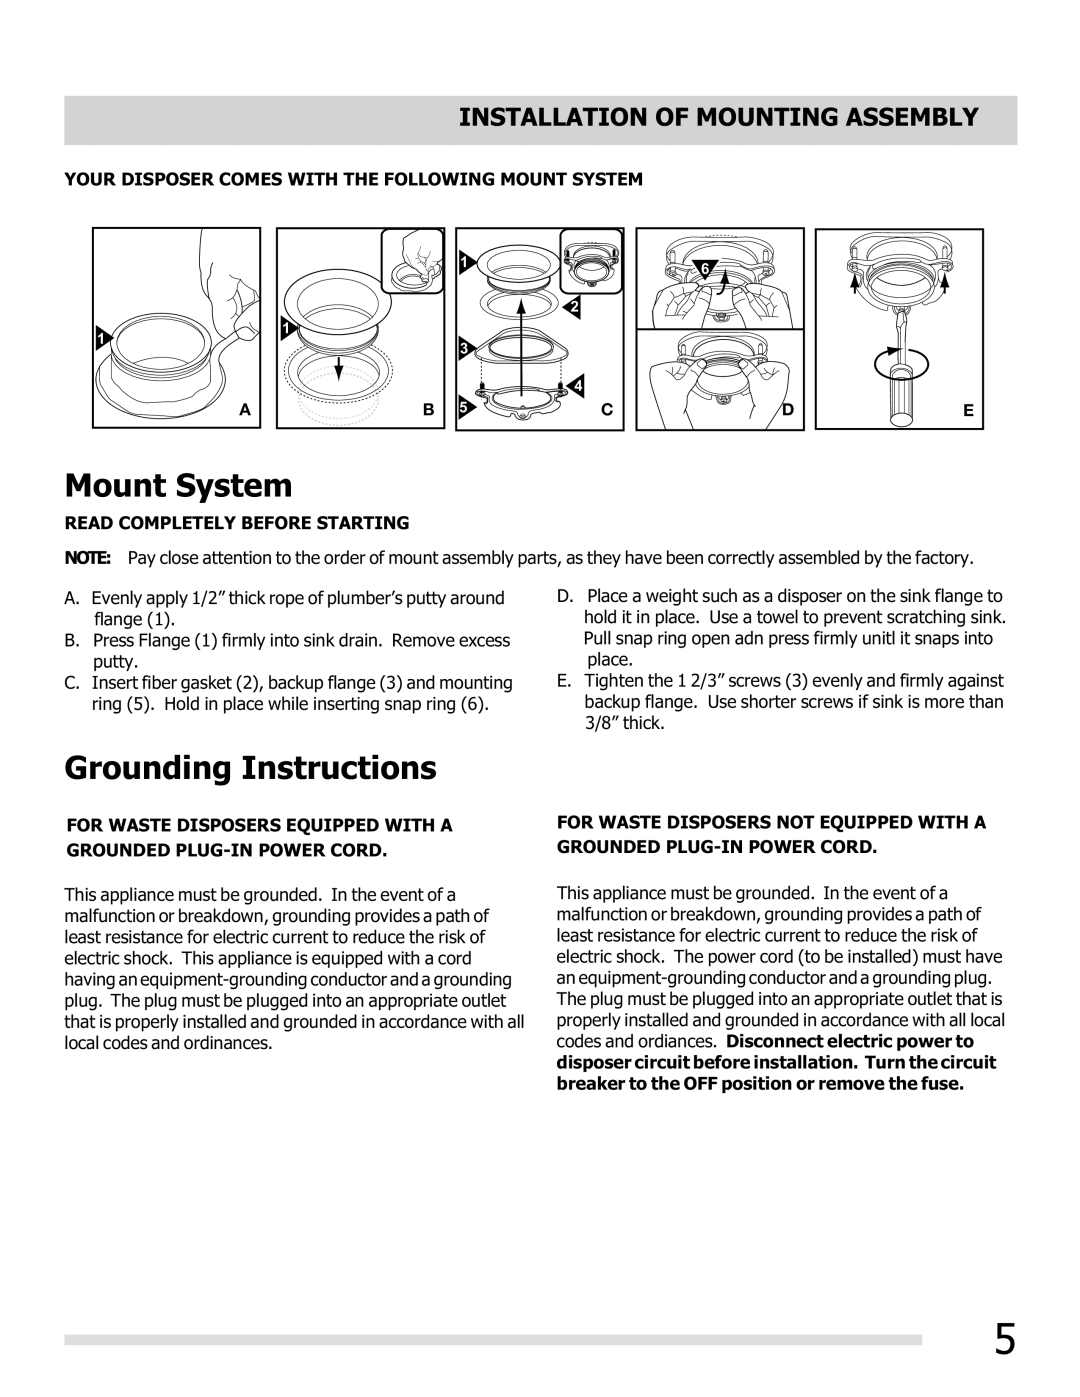 Frigidaire 560C525P02 manual Grounding Instructions, Mount System, Installation Of Mounting Assembly 